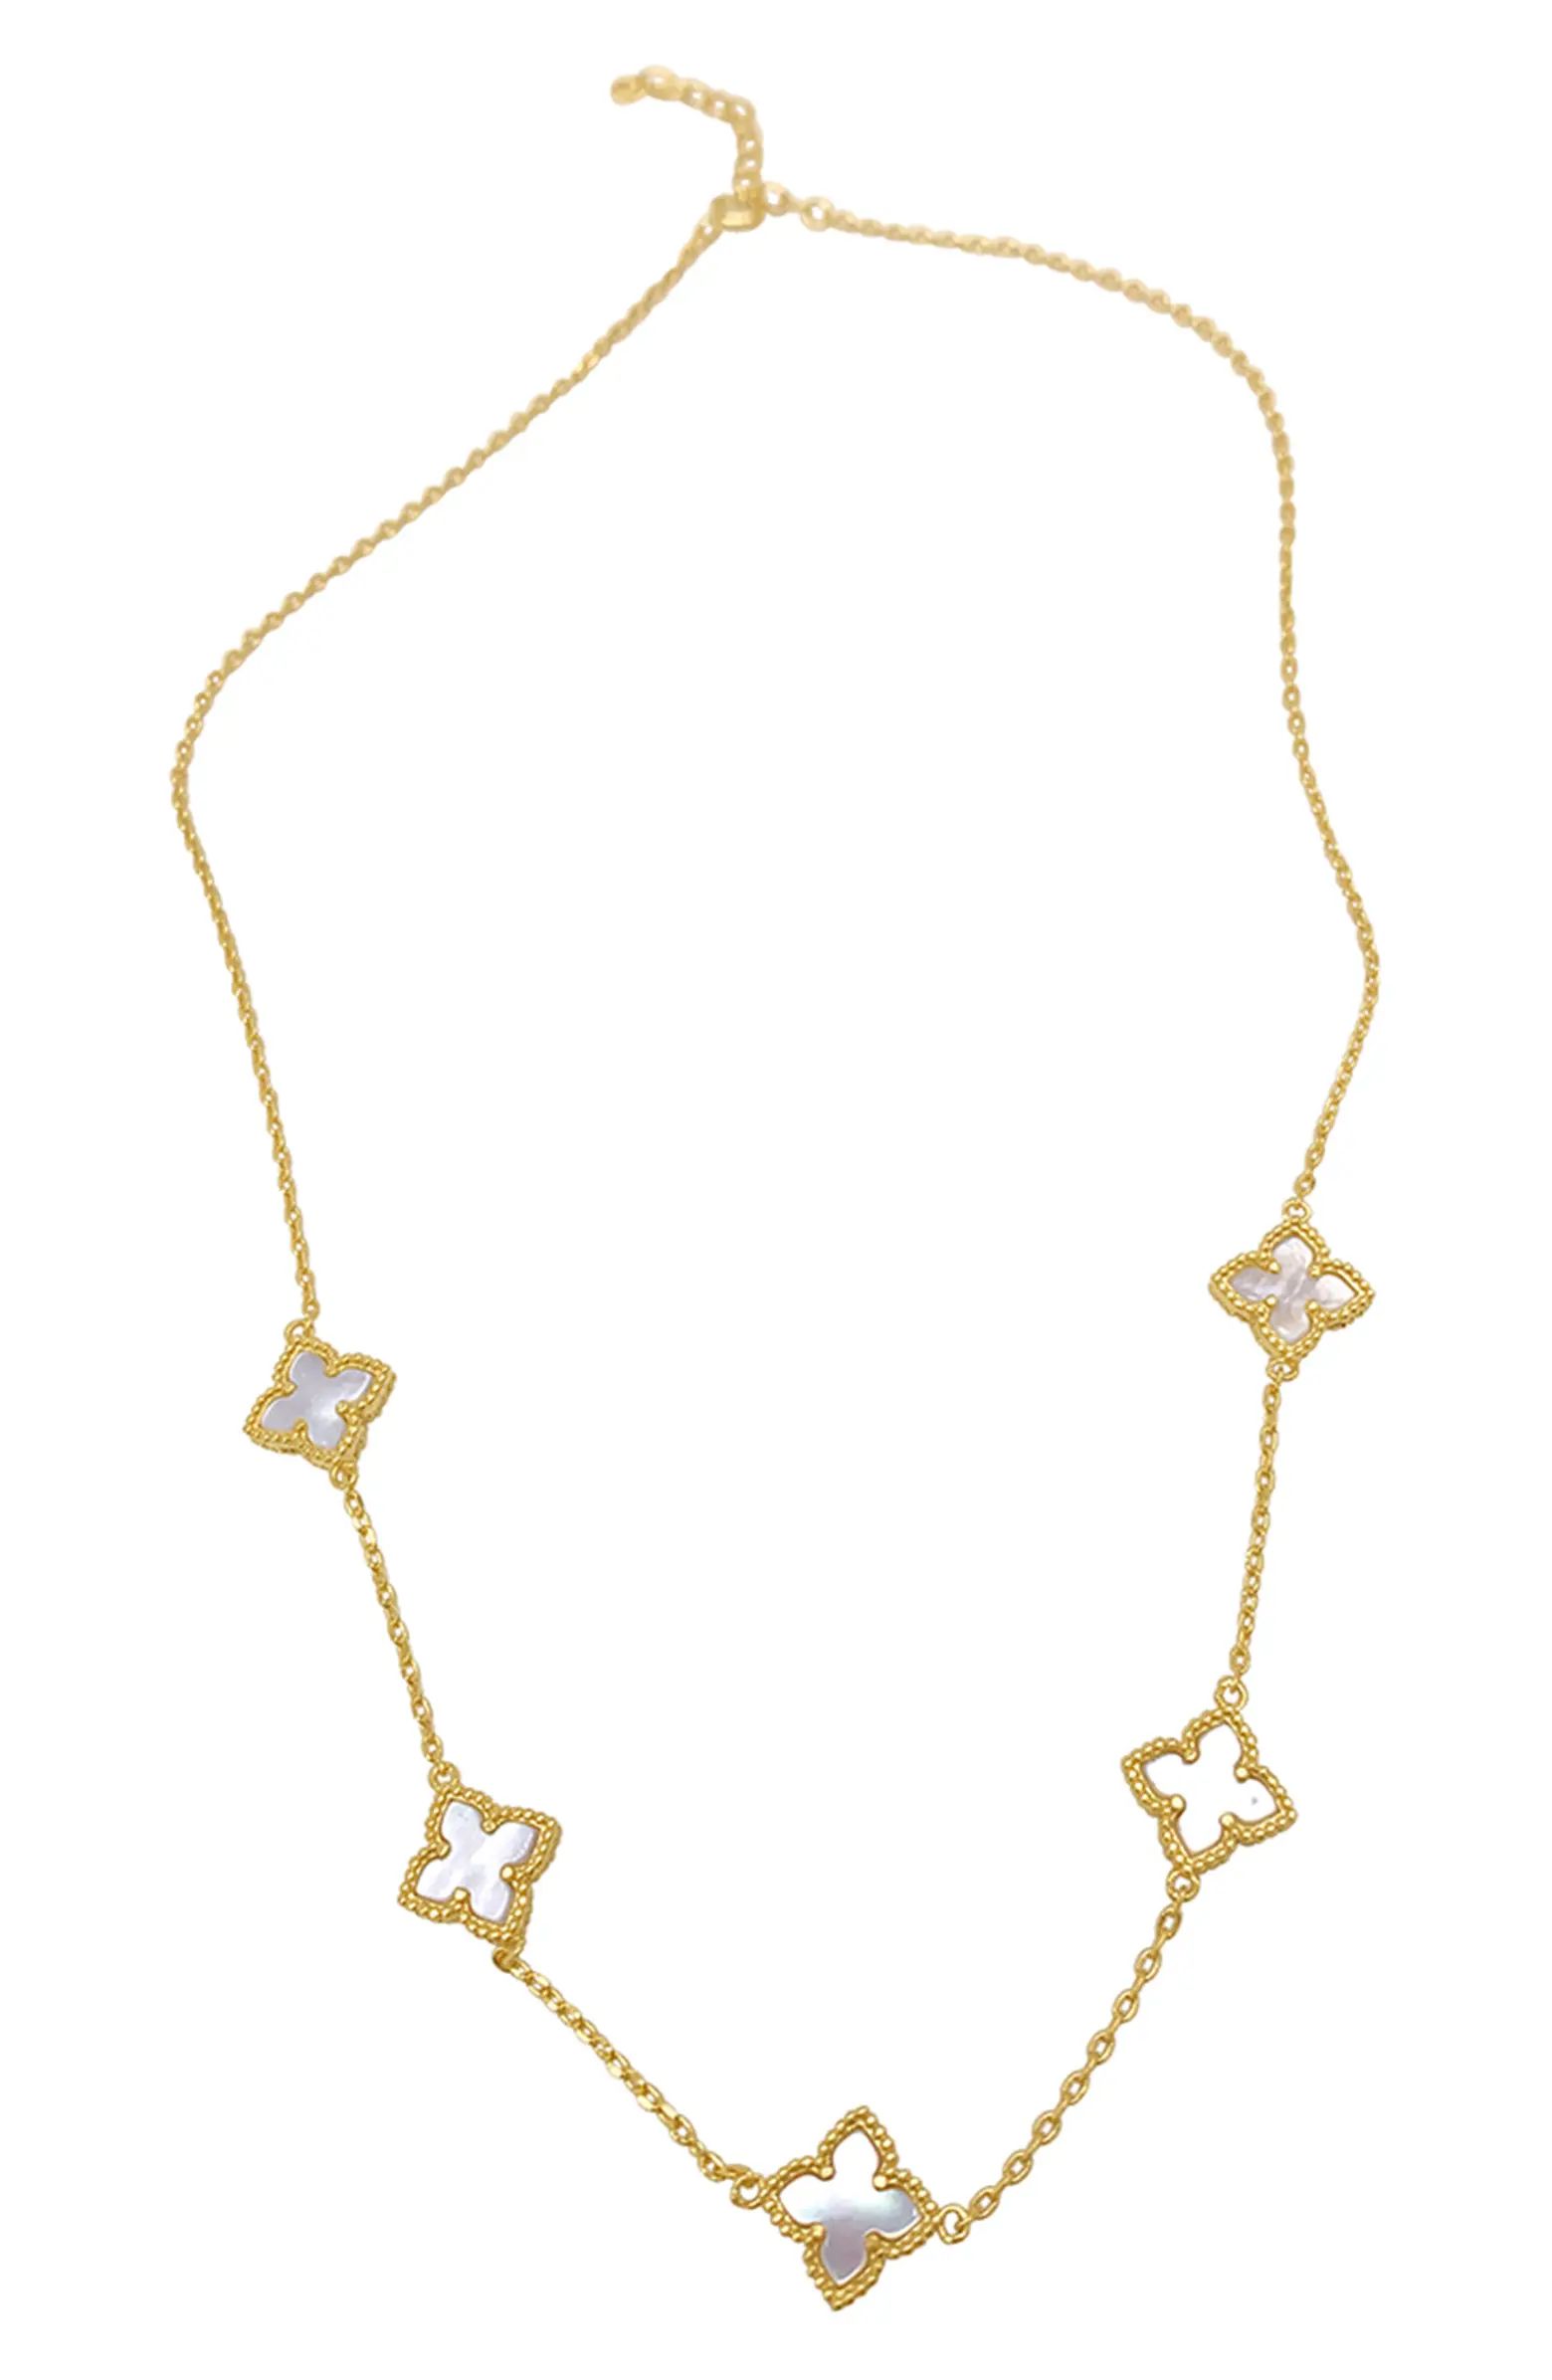 Adornia White Mother of Pearl Station Chain Necklace | Nordstromrack | Nordstrom Rack